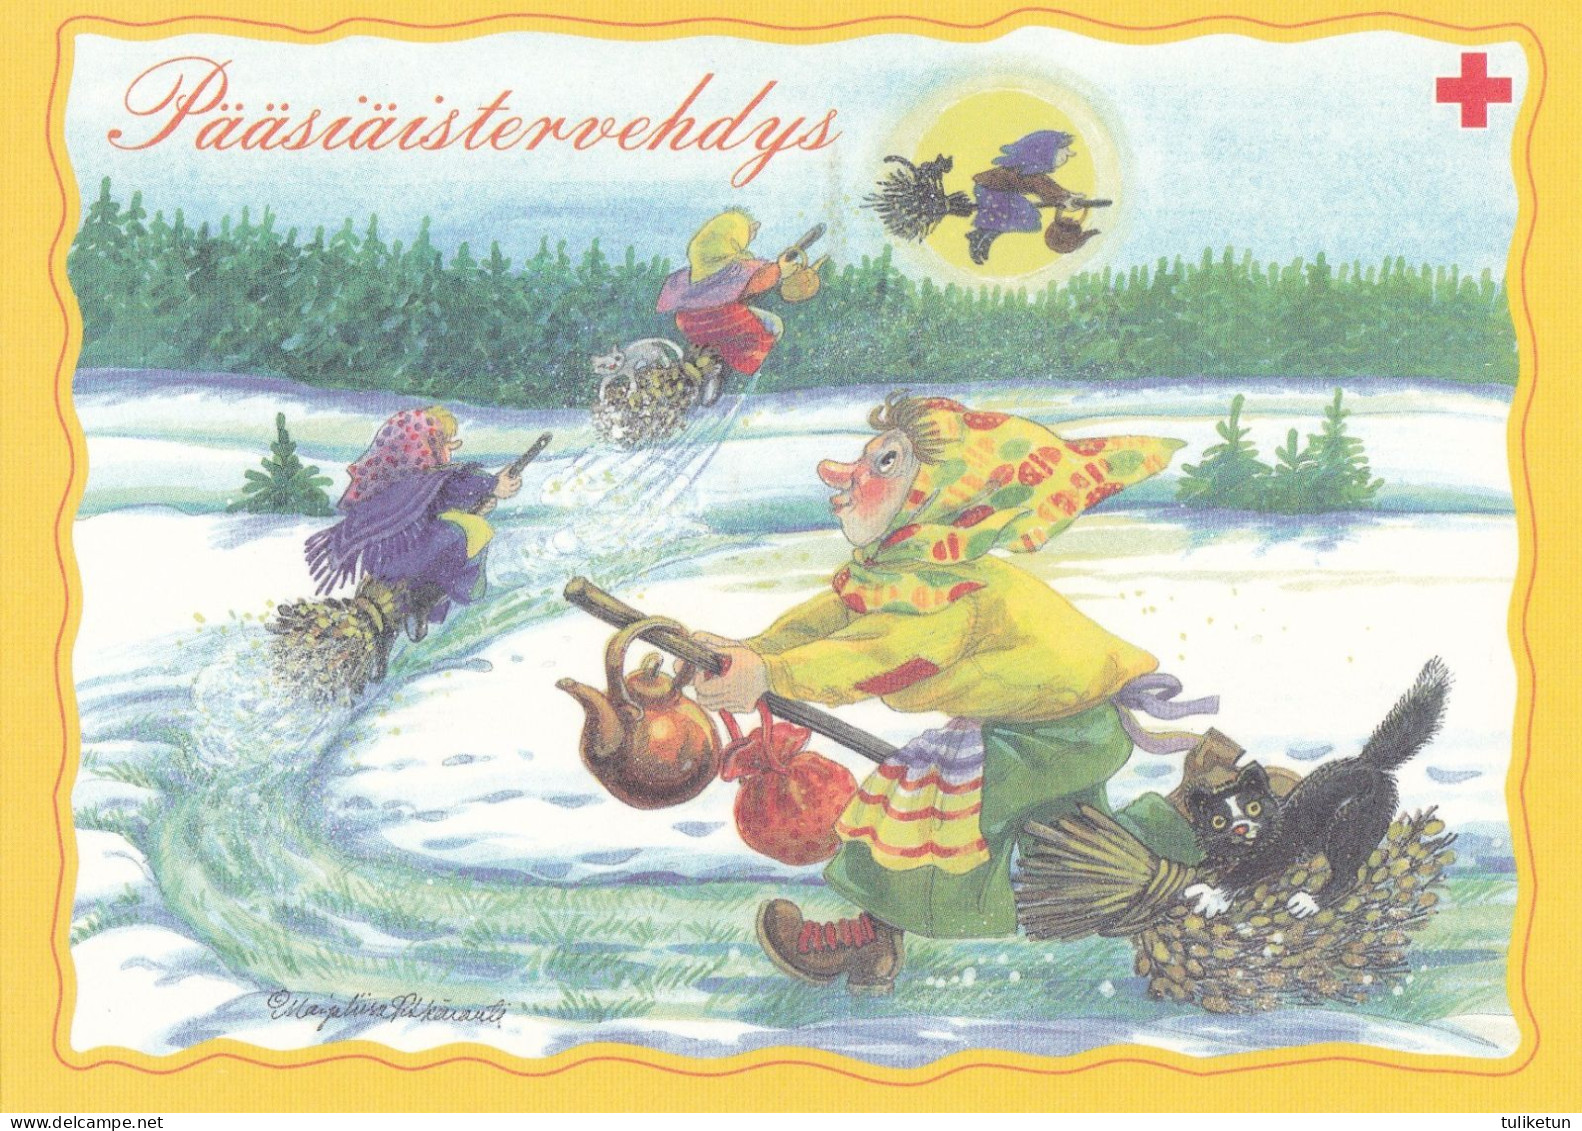 Postal Stationery - Flowers - Easter Witches With Cats - Red Cross 2001 - Suomi Finland - Postage Paid - Ganzsachen